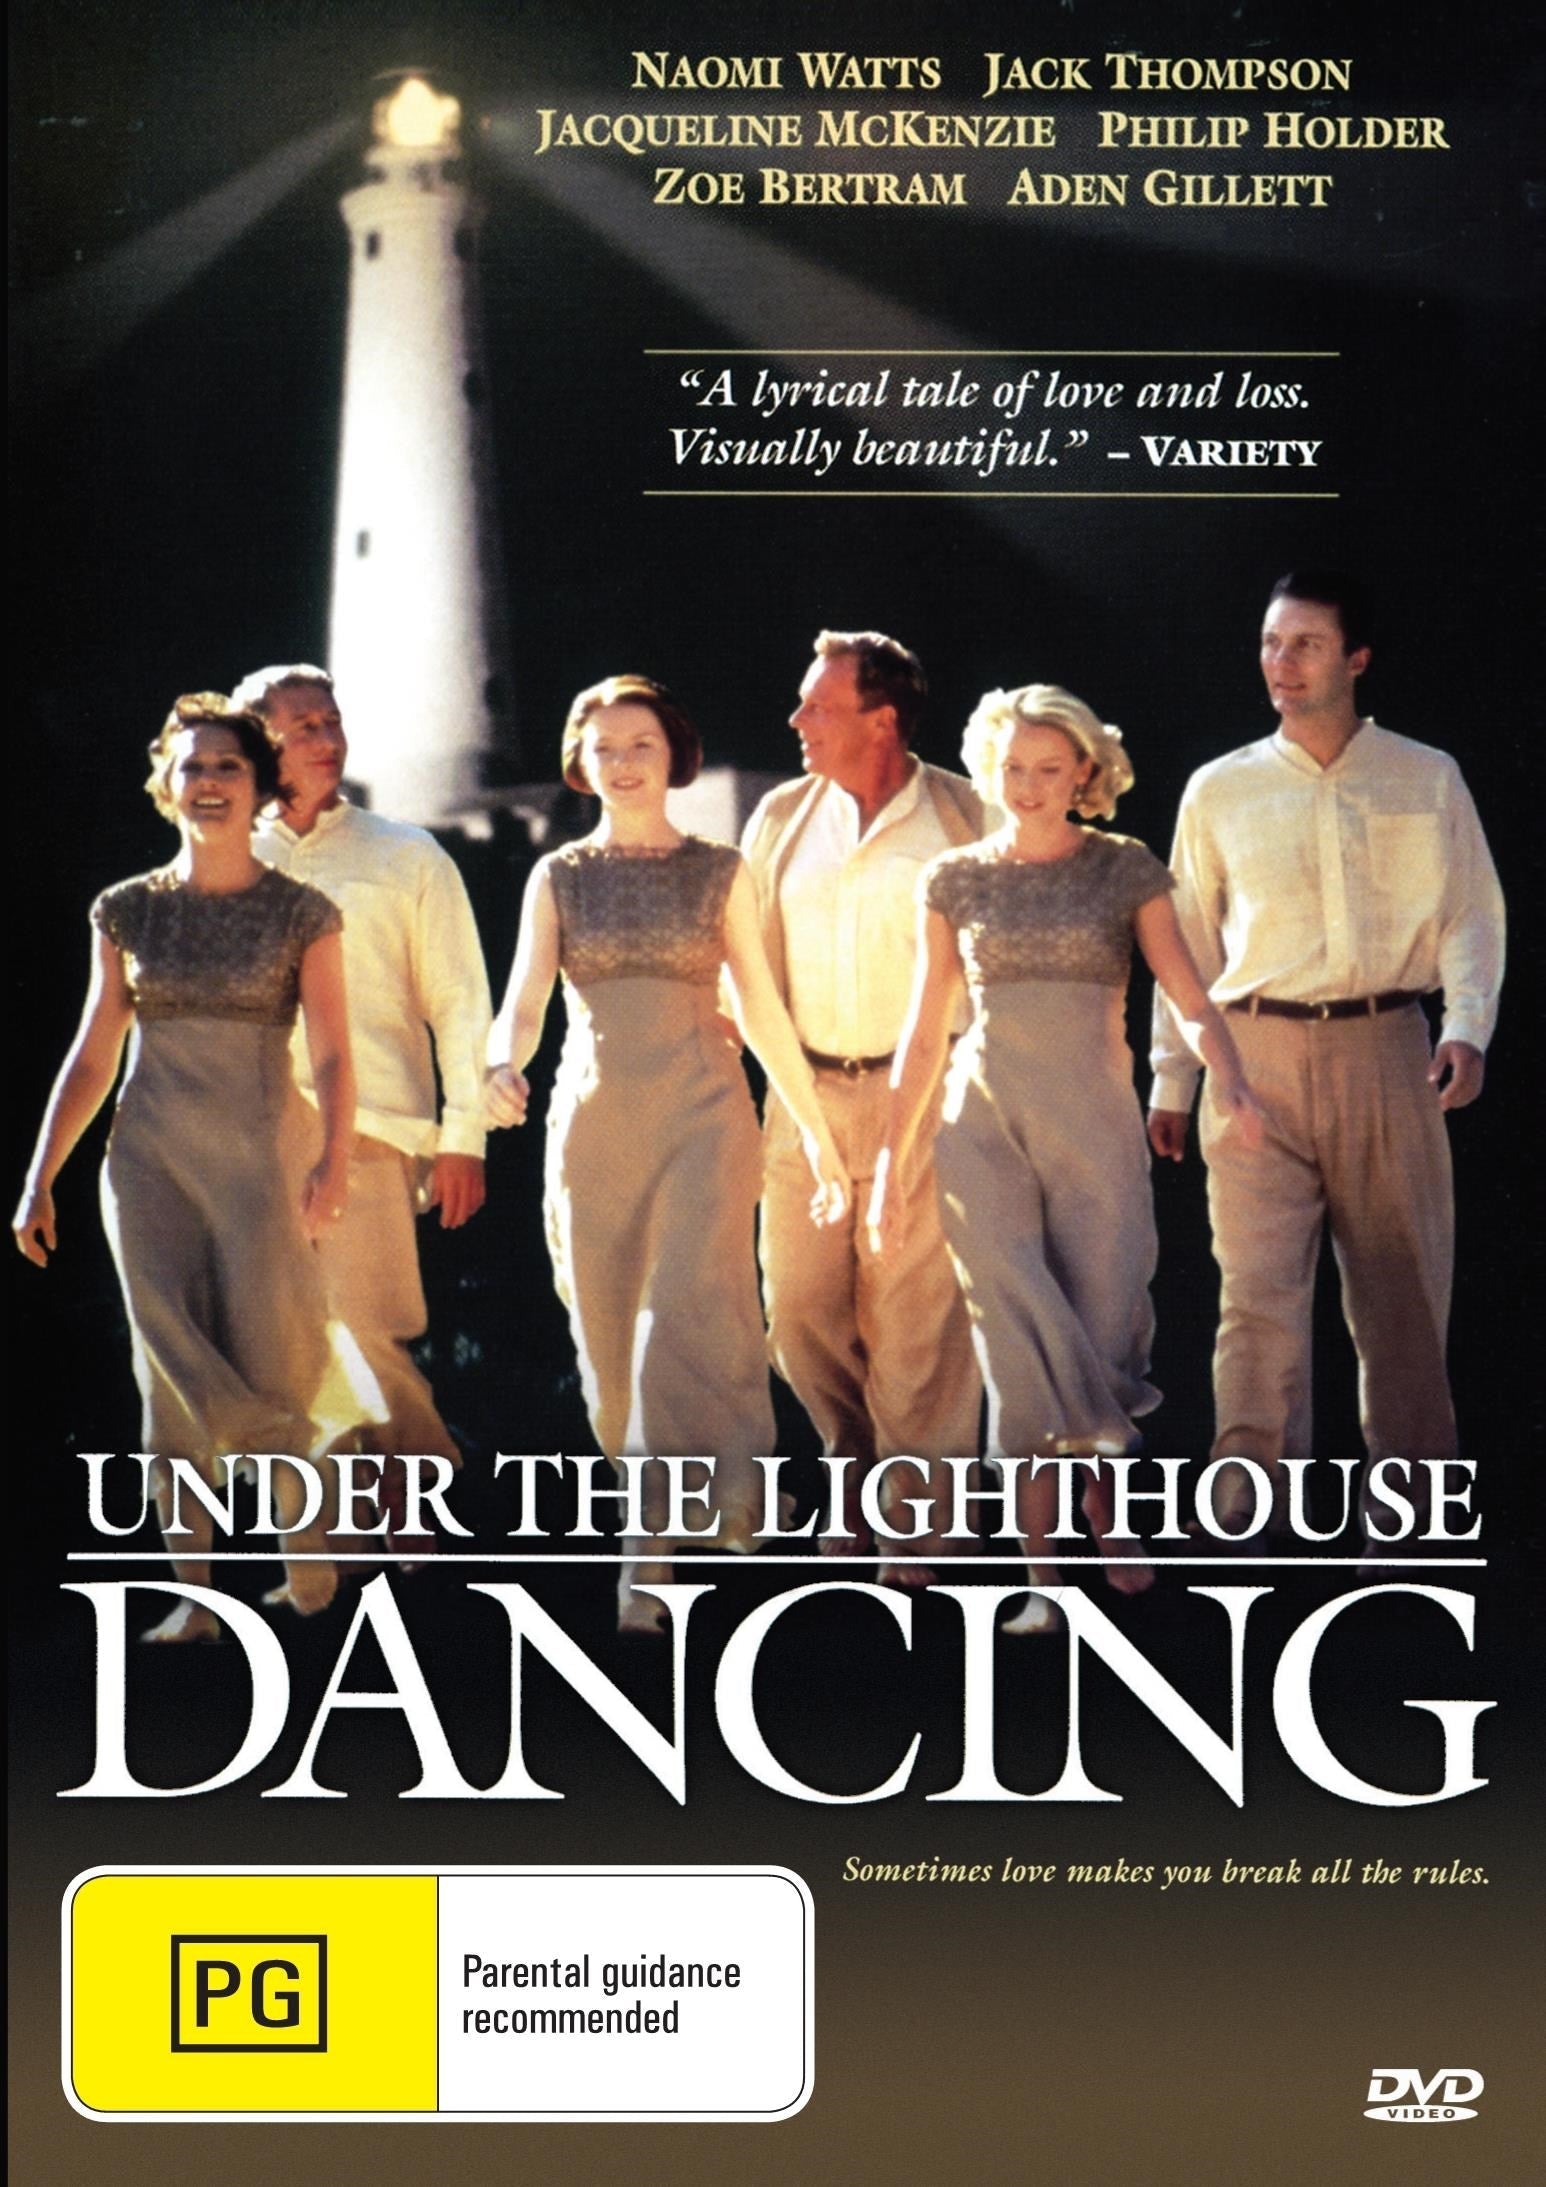 Under The Lighthouse Dancing rareandcollectibledvds